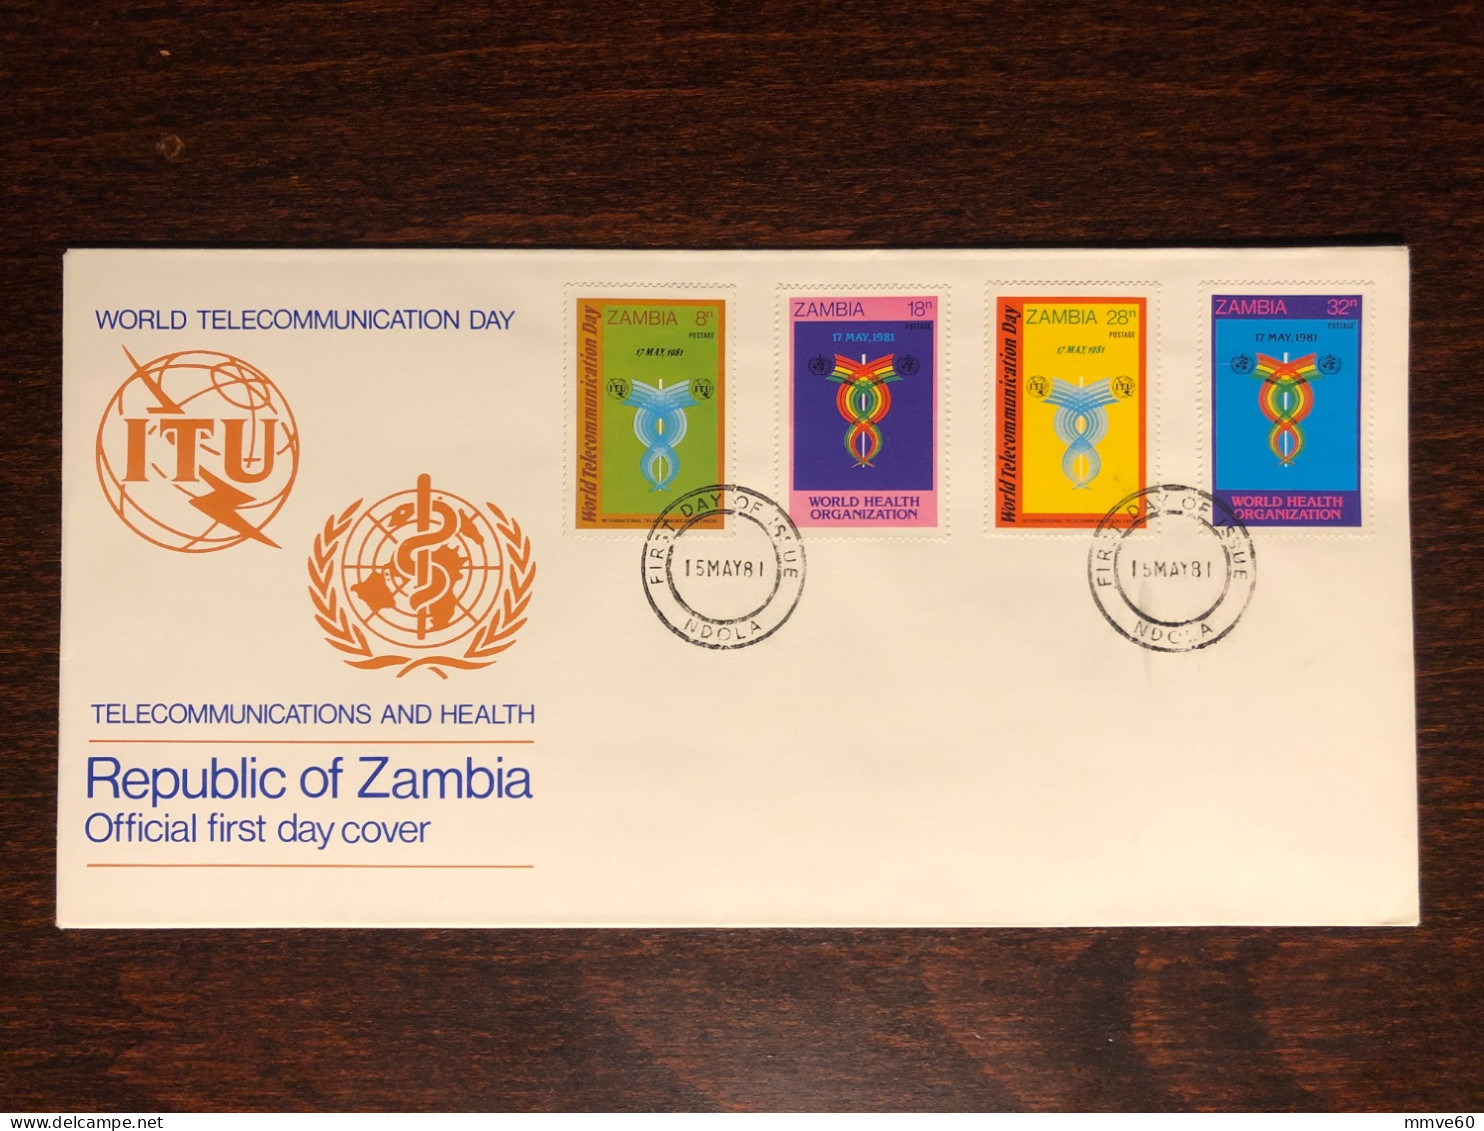 ZAMBIA FDC COVER 1981 YEAR TELECOMMUNICATIONS AND HEALTH MEDICINE STAMPS - Zambia (1965-...)